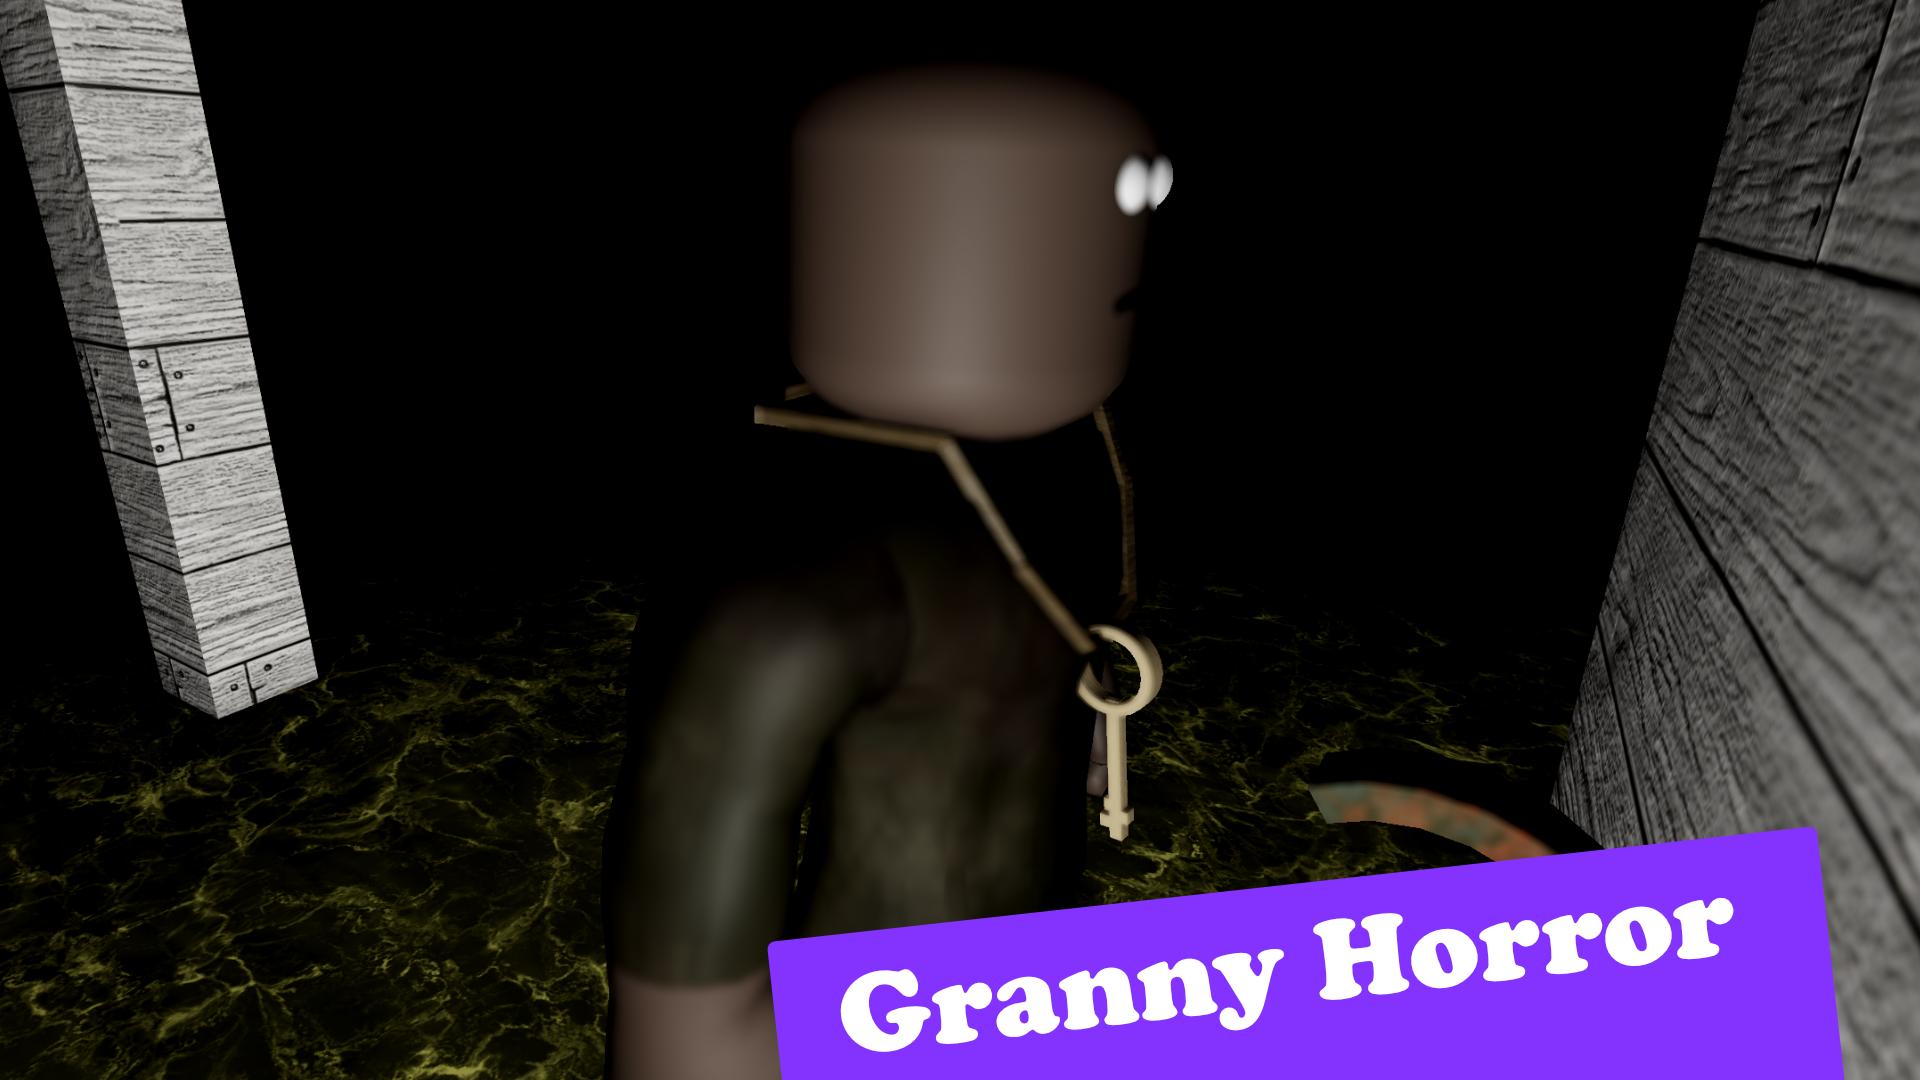 Granny: Chapter 2 game on PC for Free Download